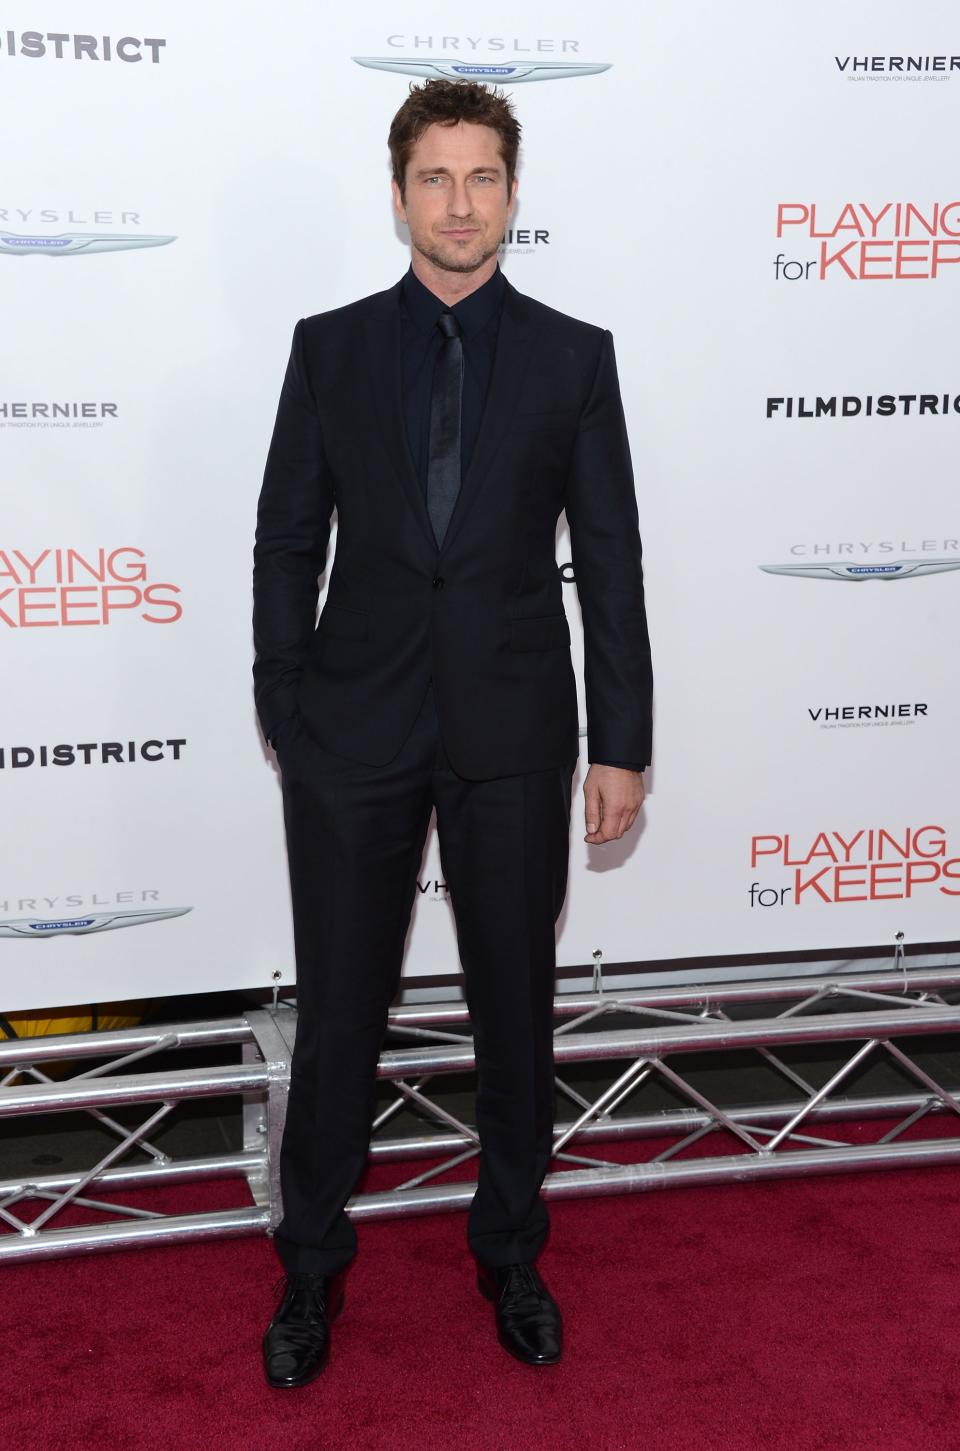 Film District And Chrysler With The Cinema Society Premiere Of "Playing For Keeps" - Arrivals